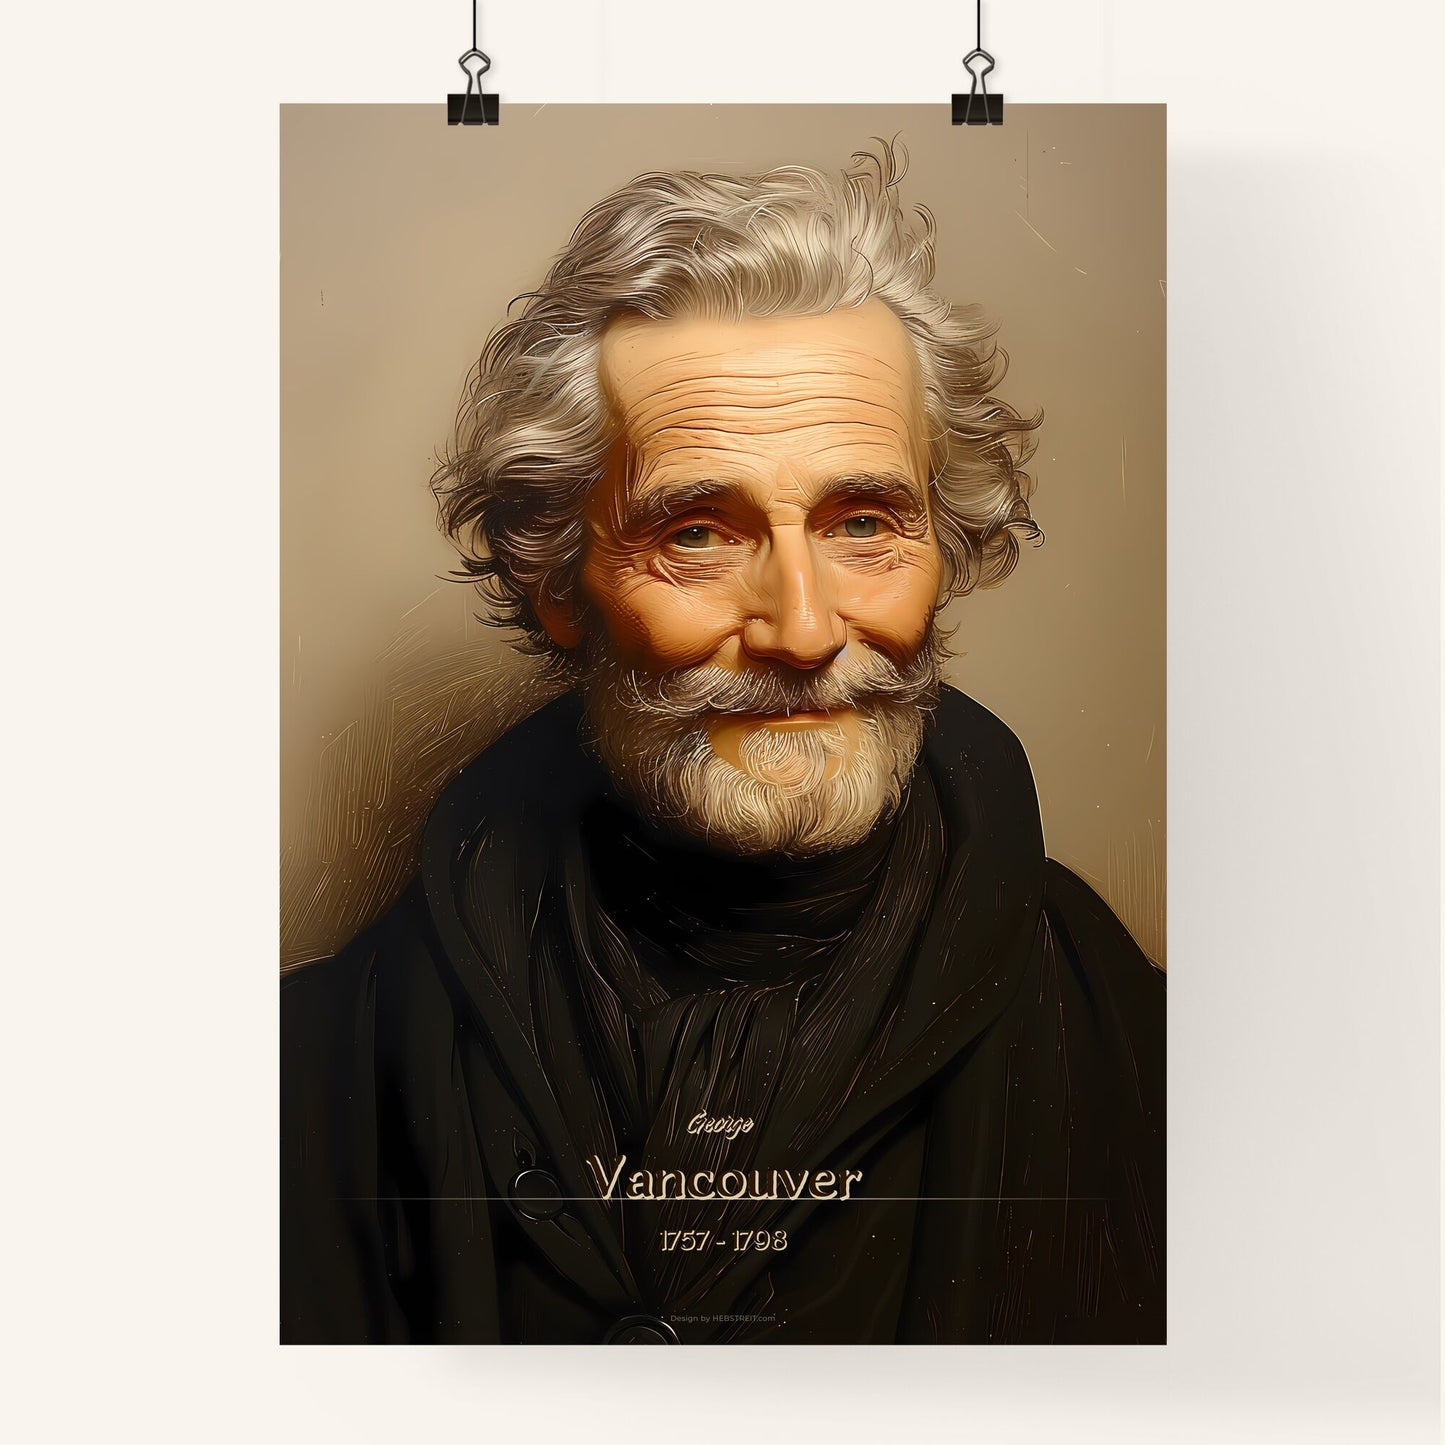 George, Vancouver, 1757 - 1798, A Poster of a man with a beard and mustache Default Title